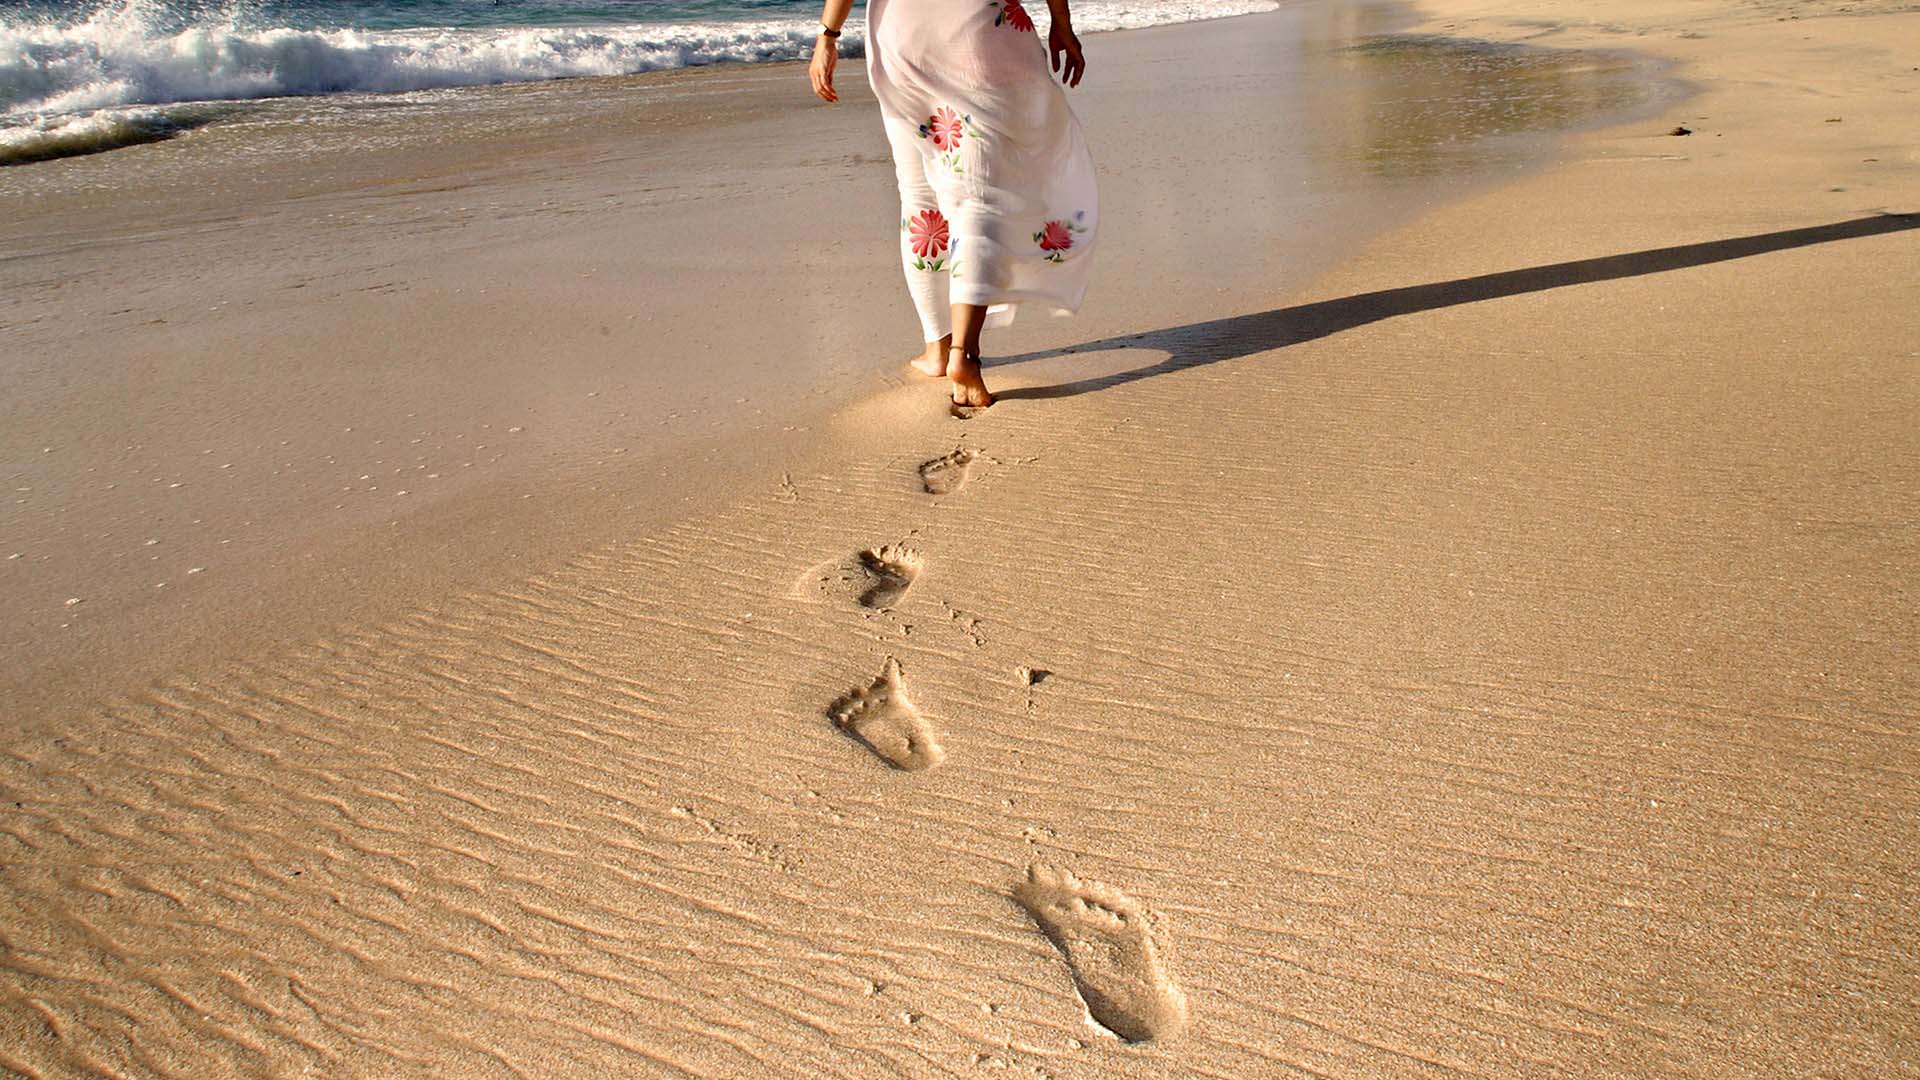 Free photo: Footprints in sand.